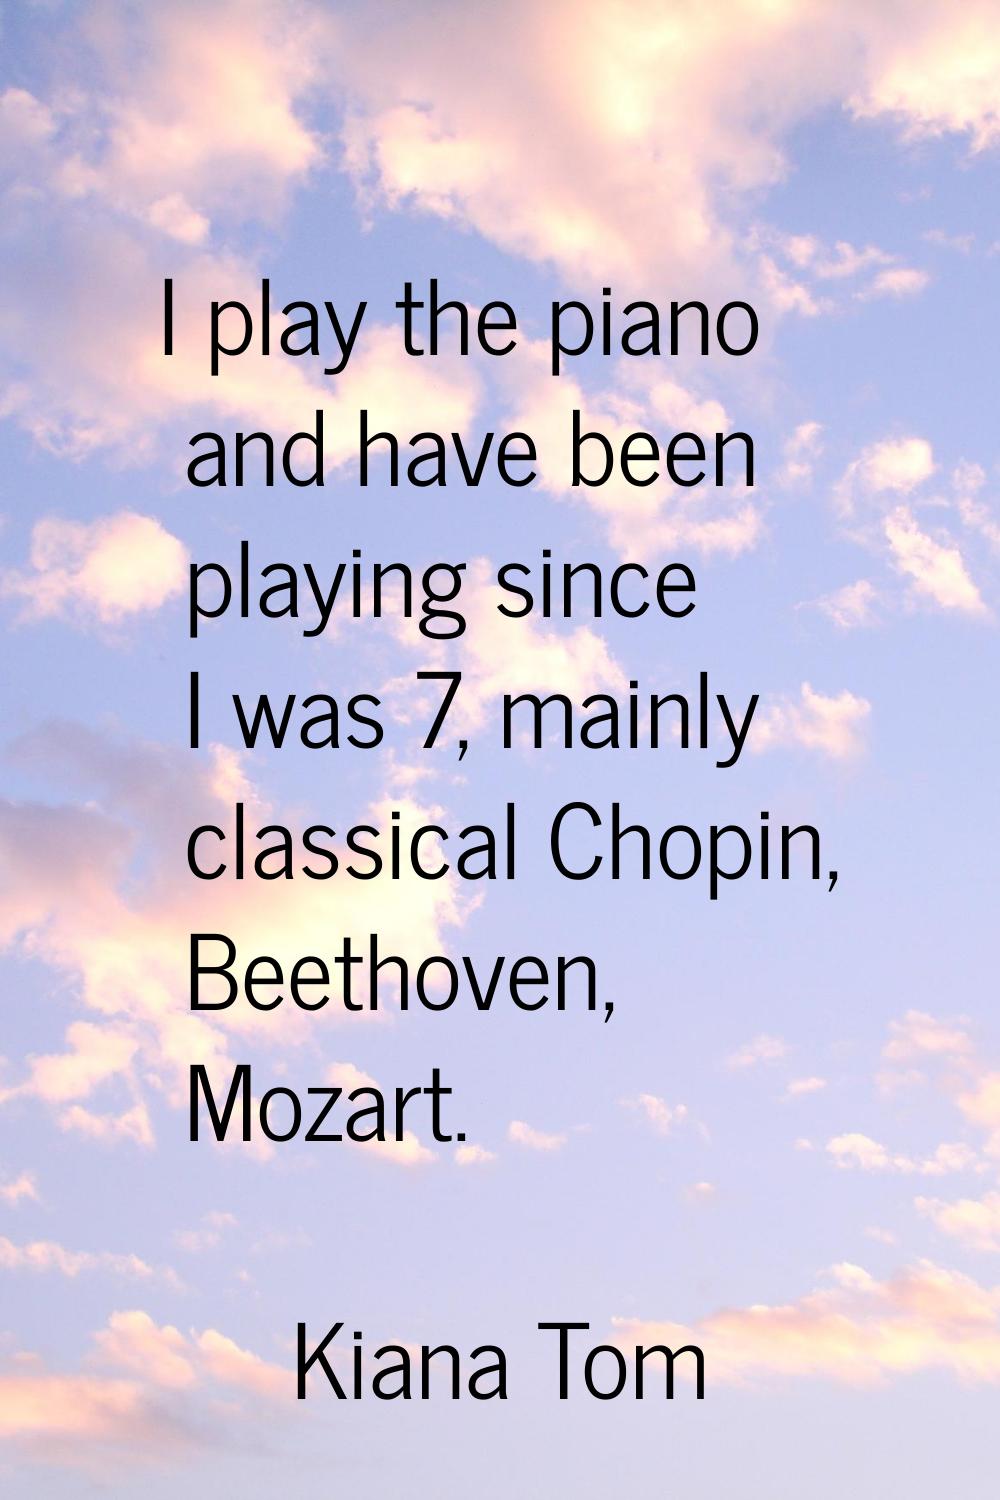 I play the piano and have been playing since I was 7, mainly classical Chopin, Beethoven, Mozart.